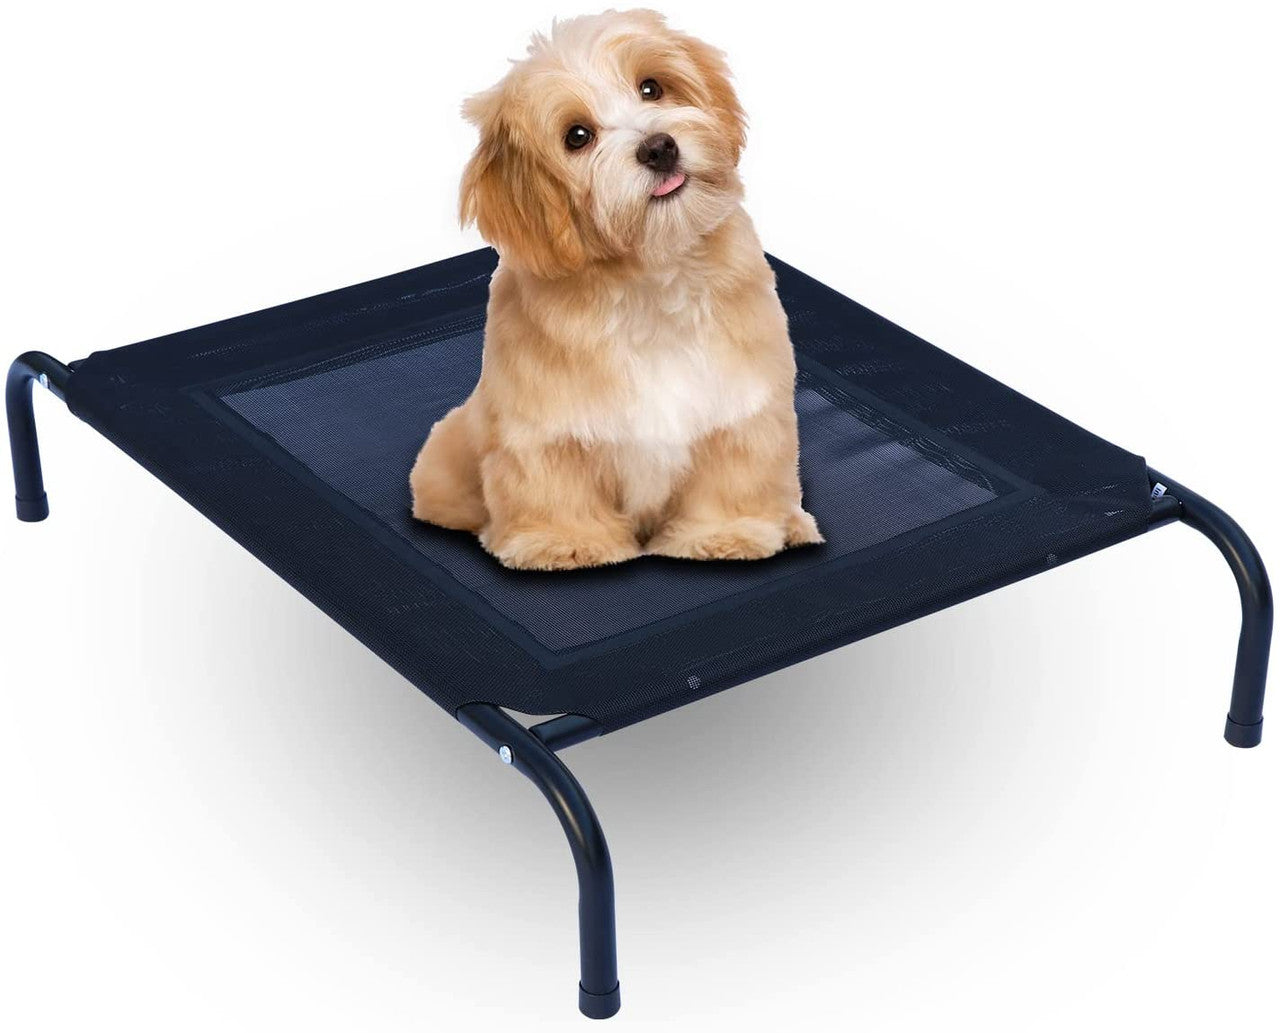 Portable Elevated Dog Pet Bed With Steel-Frame And Breathable Mesh For Small Medium Dogs And Cats